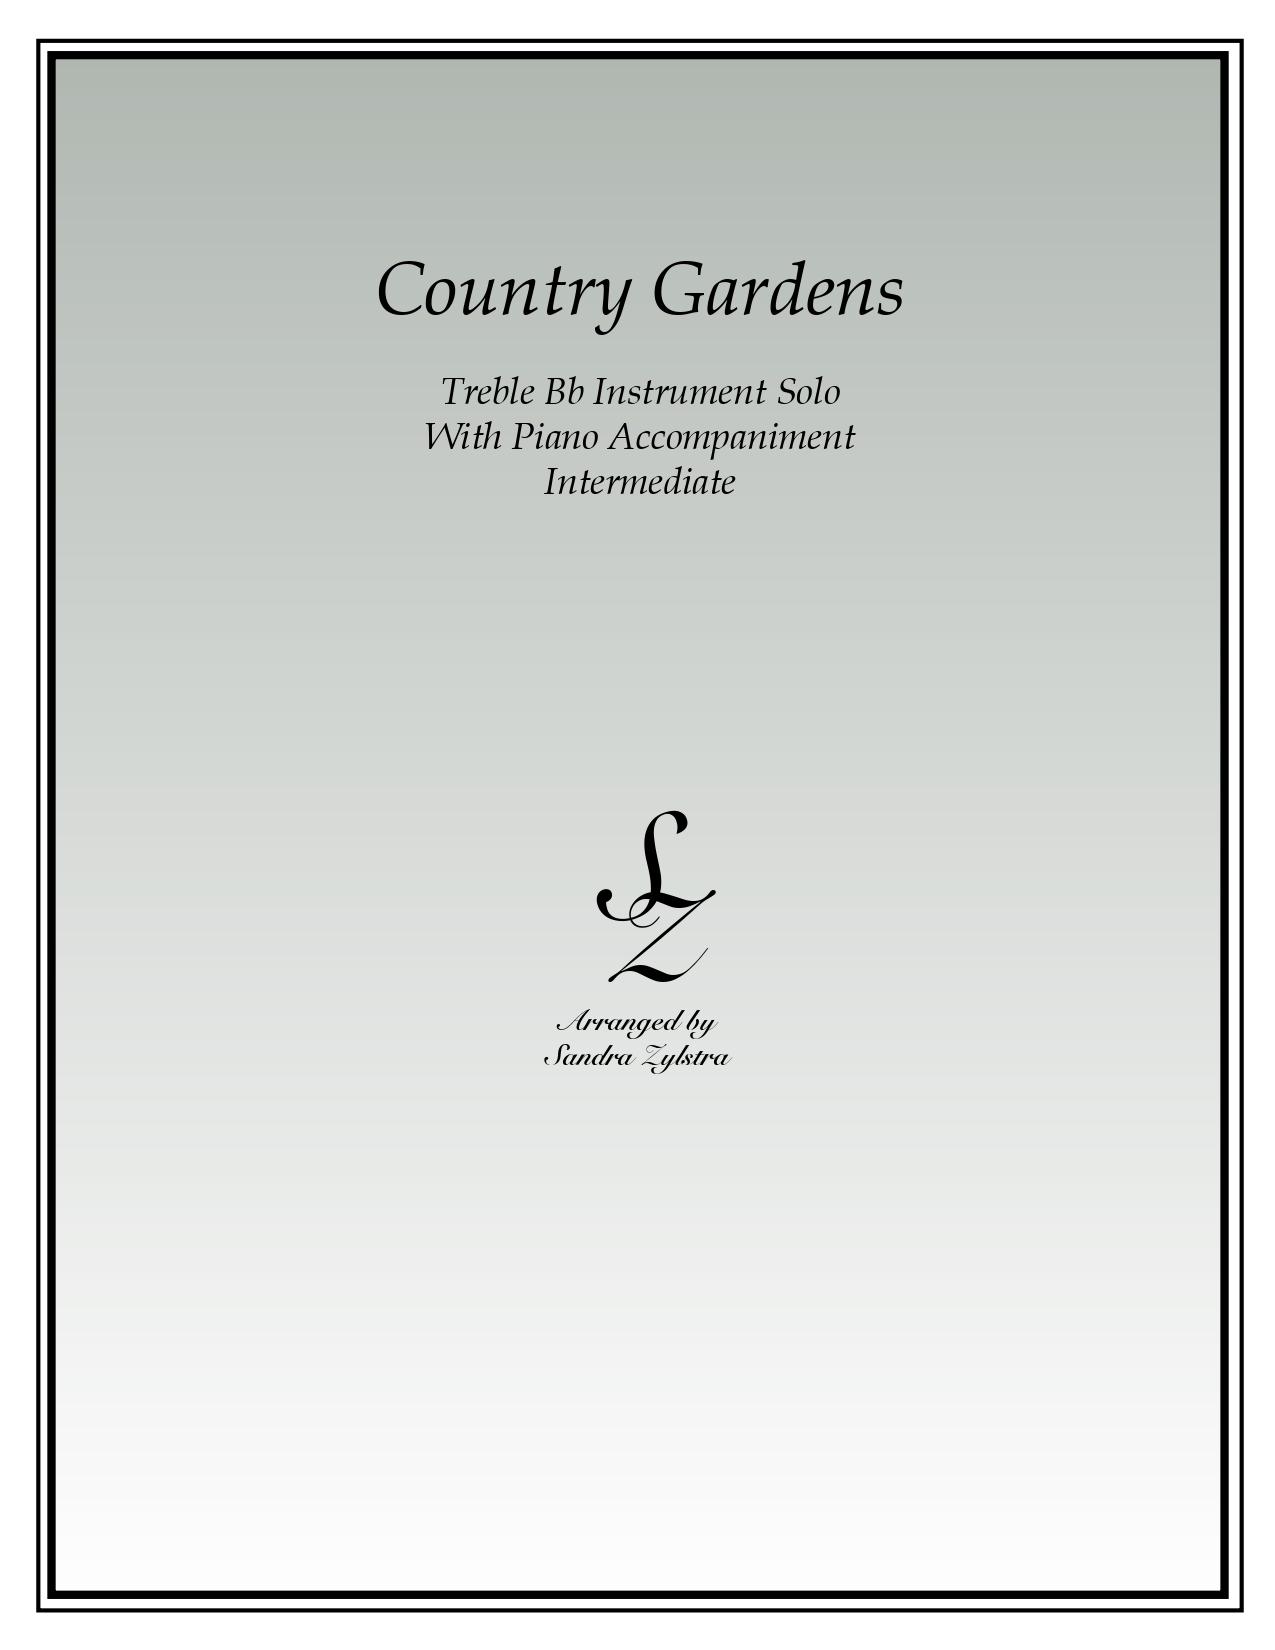 Country Gardens Bb instrument solo part cover page 00011